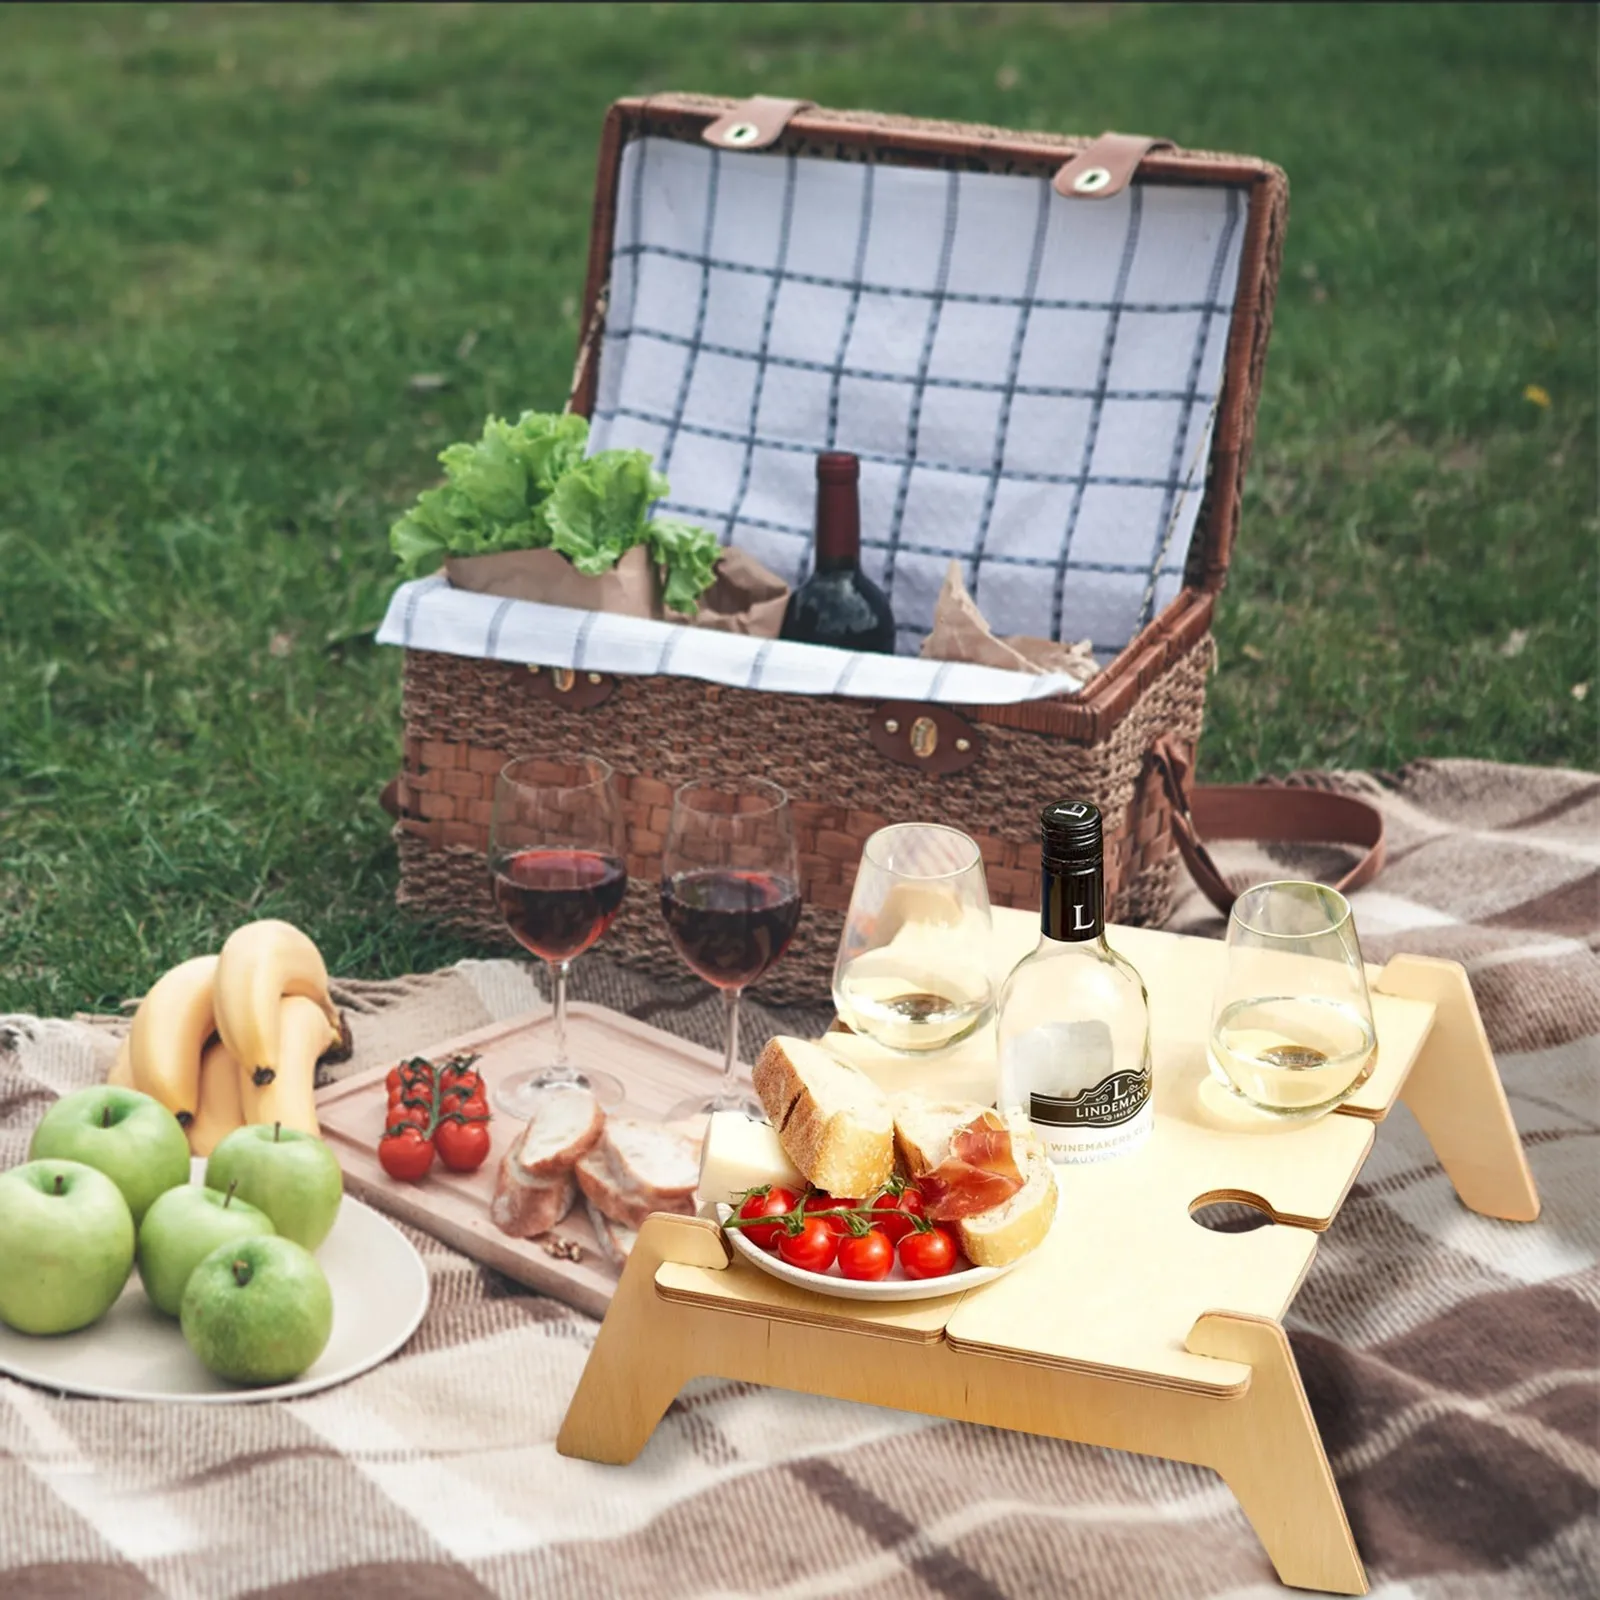 Wooden Outdoor Wine Table Folding Picnic-table With Glass Holder 2 In 1 Wine Glass Rack Outdoor Portable Picnic Folding Table outdoor furniture black